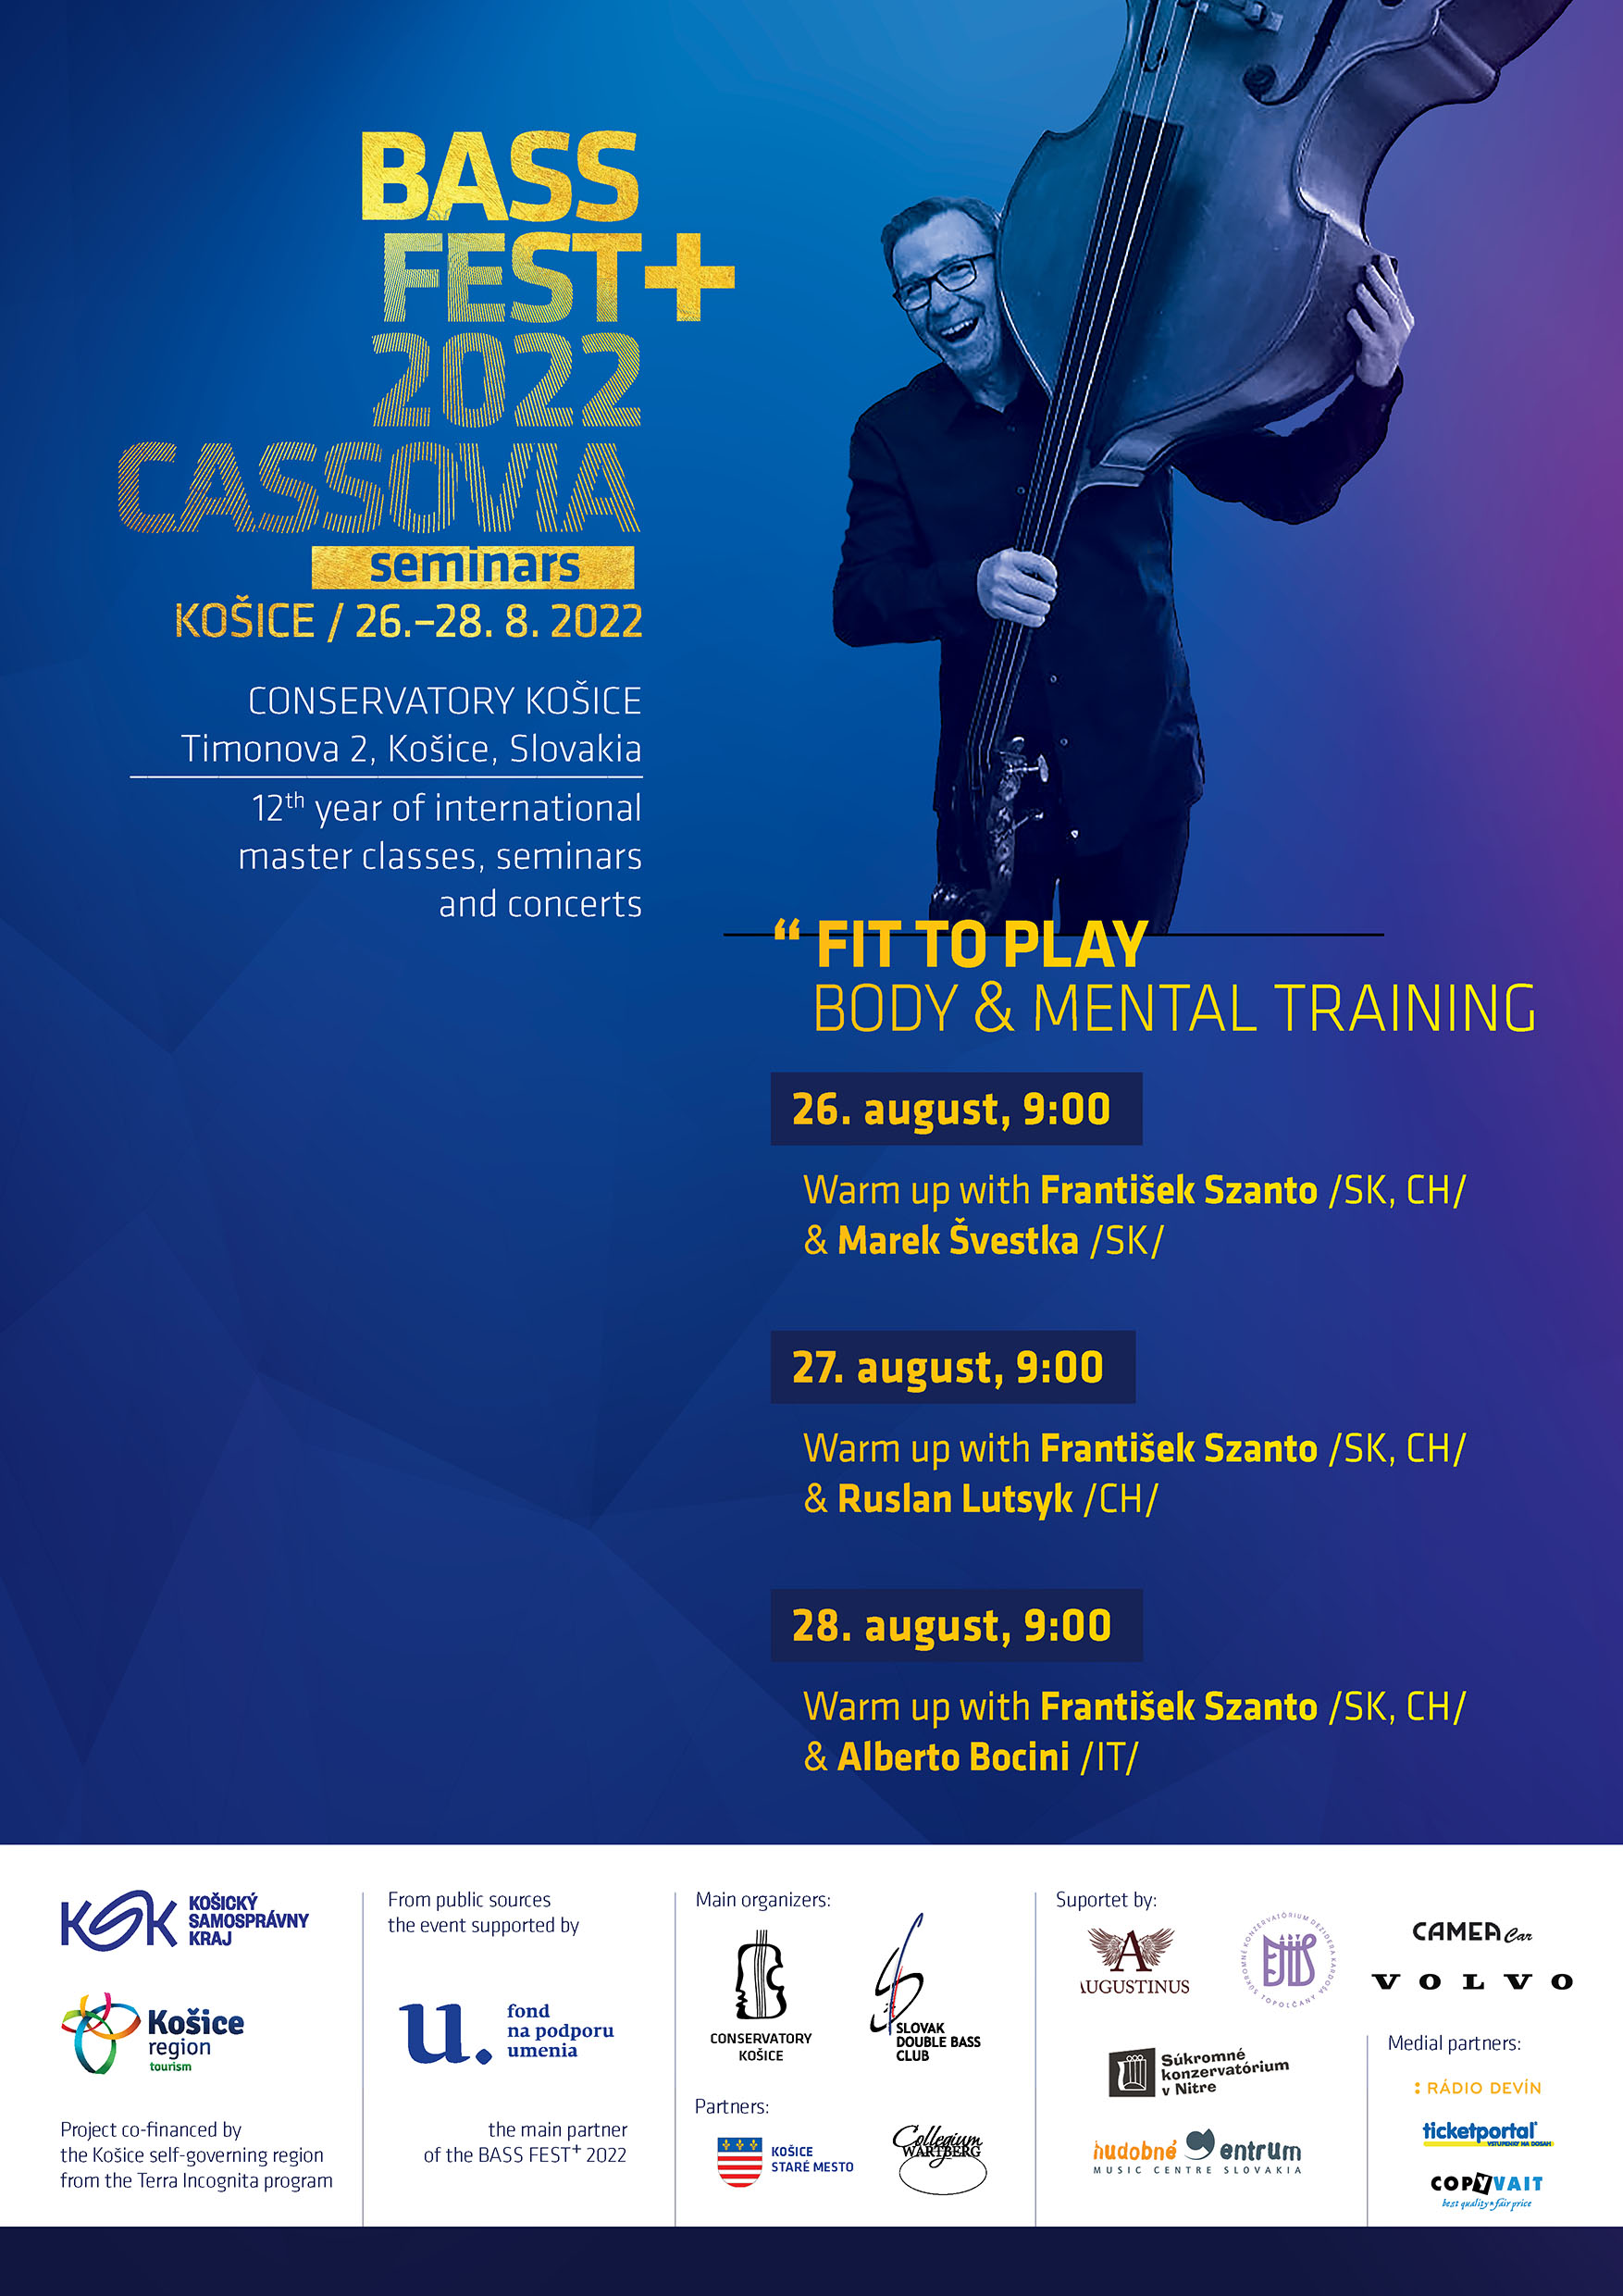 “Fit to play” and warm up with František Szanto